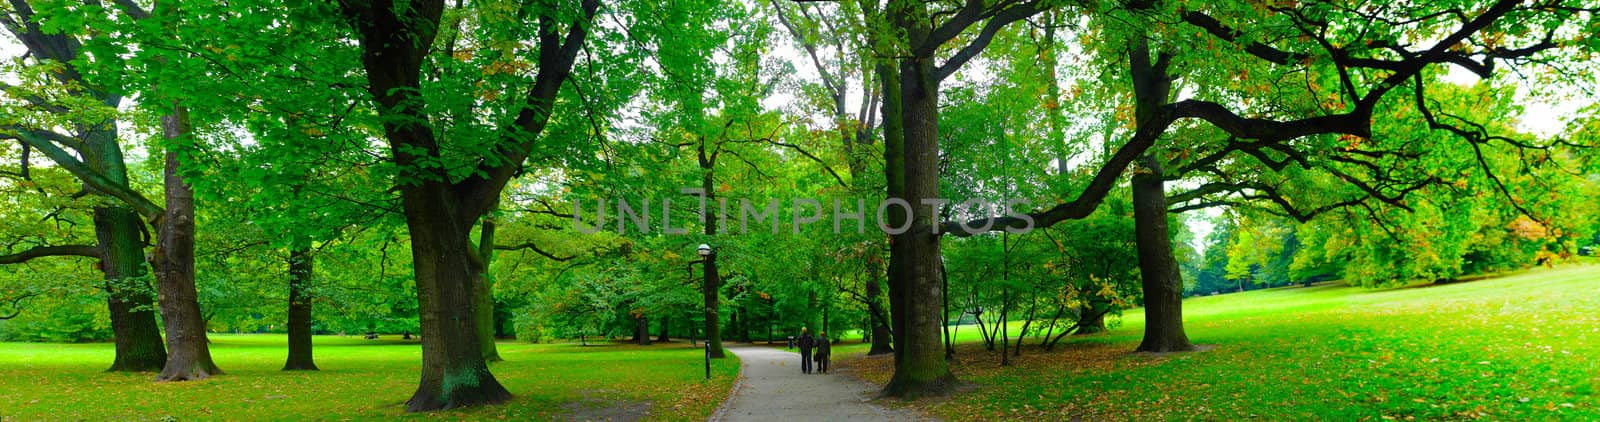 Park in autumn time by andromeda13